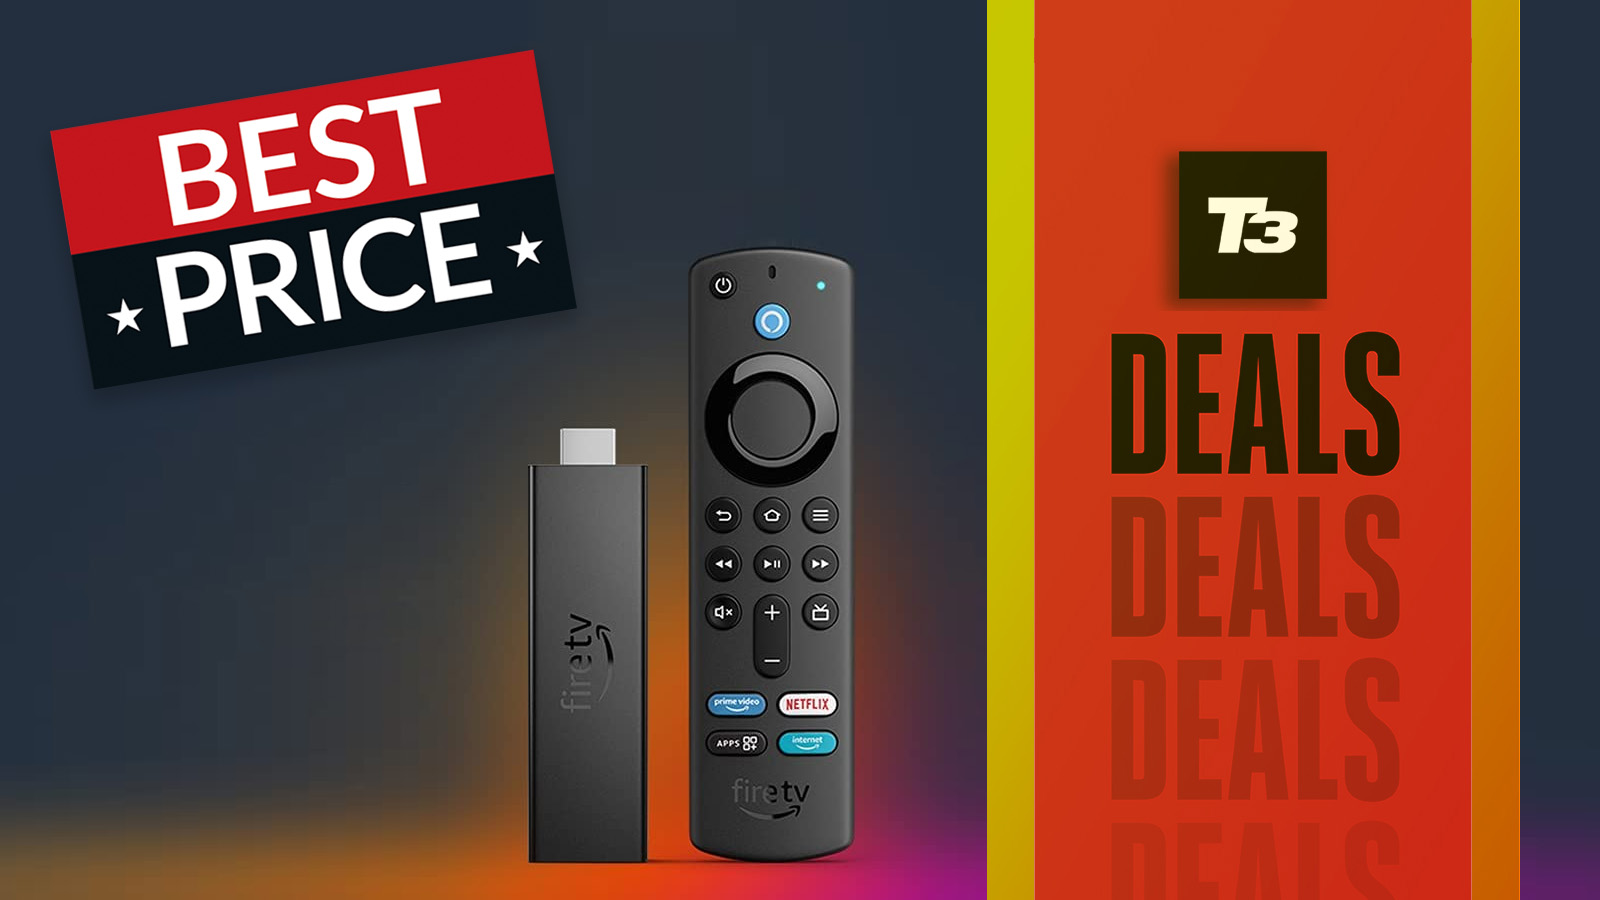 The Fire TV Stick is on sale for the lowest price ever